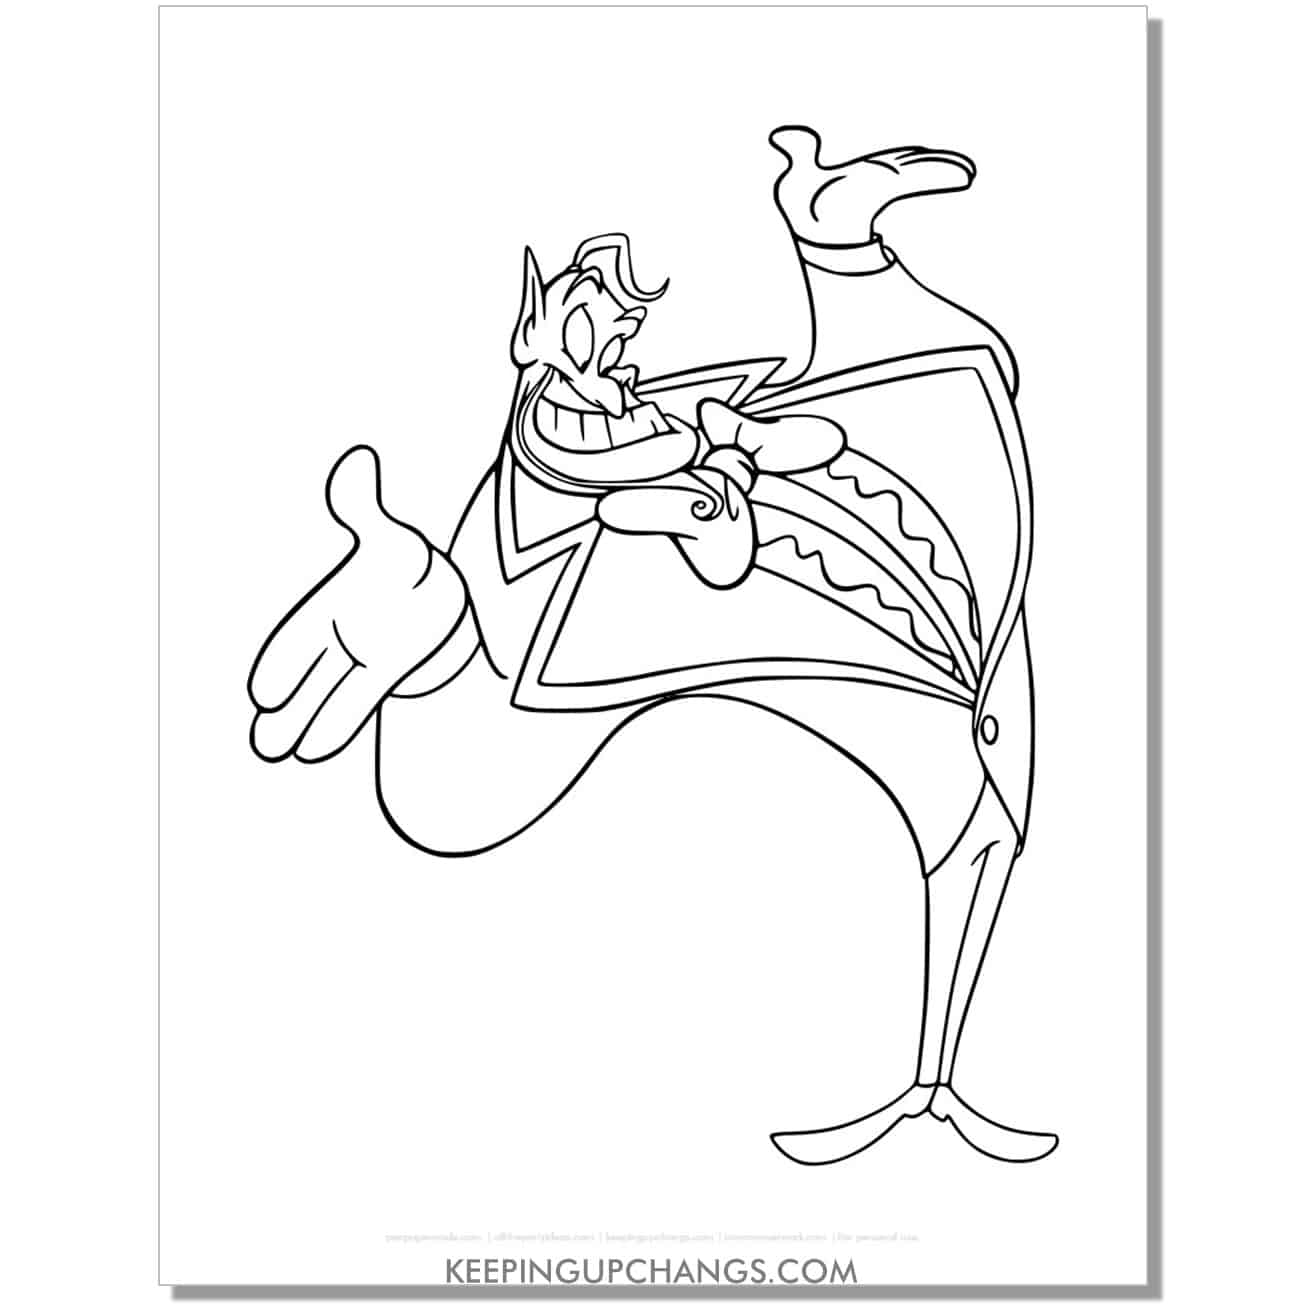 aladdin genie with legs in tux coloring page, sheet.